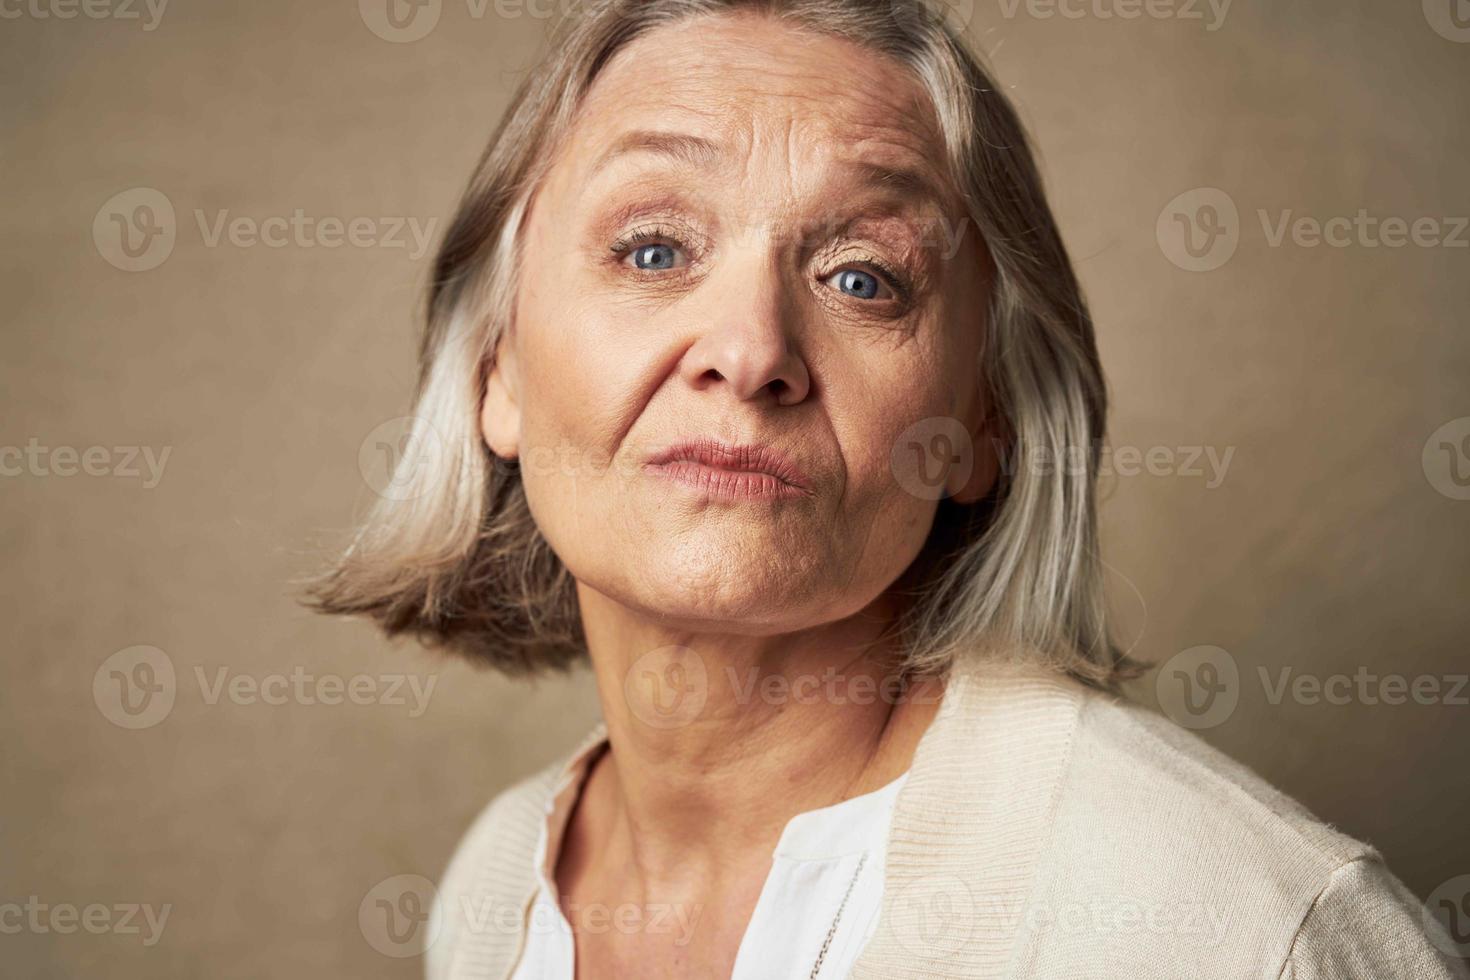 elderly woman in robe face closeup posing isolated background photo